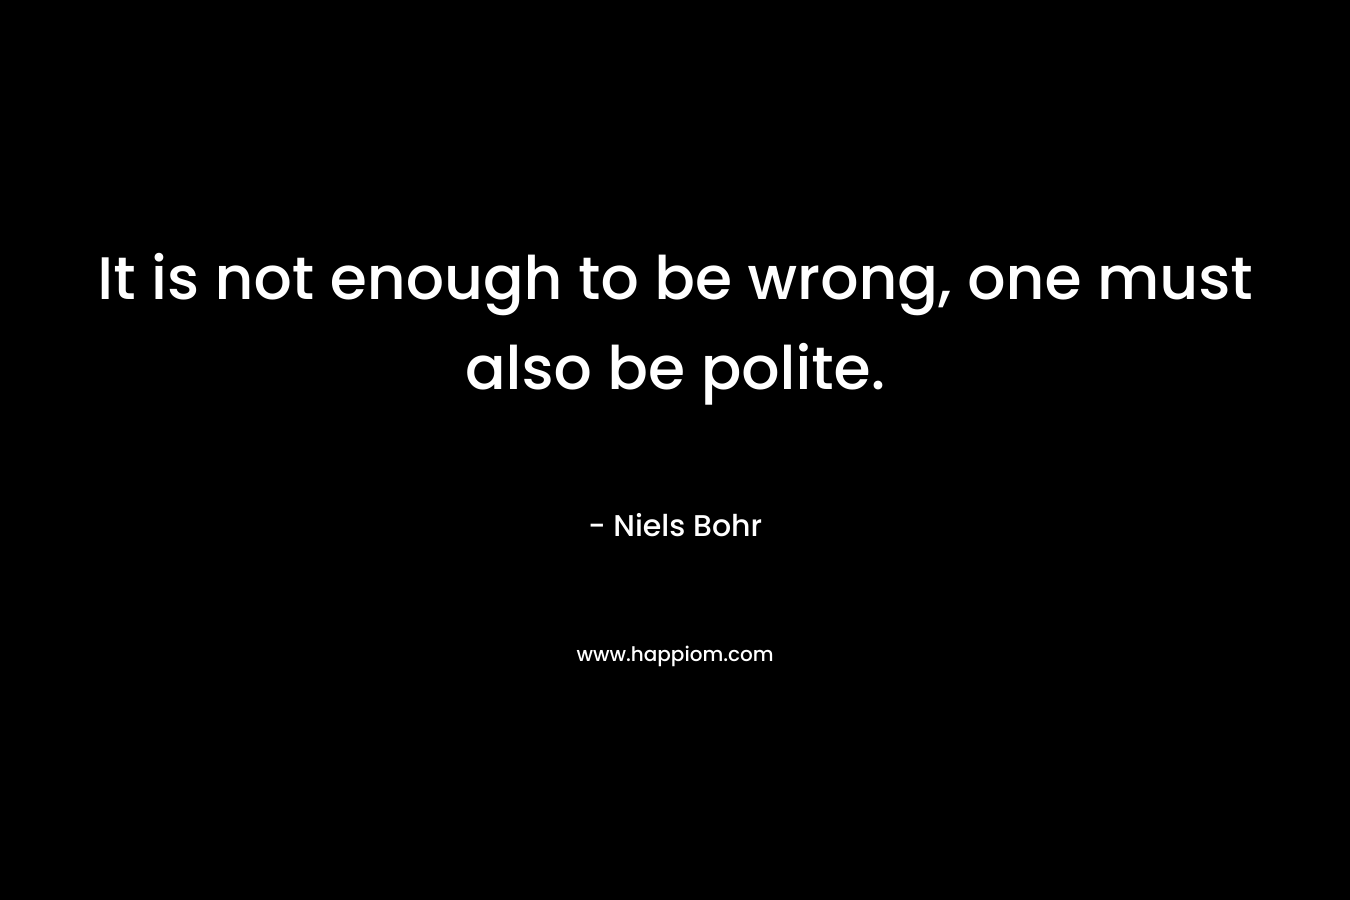 It is not enough to be wrong, one must also be polite. – Niels Bohr